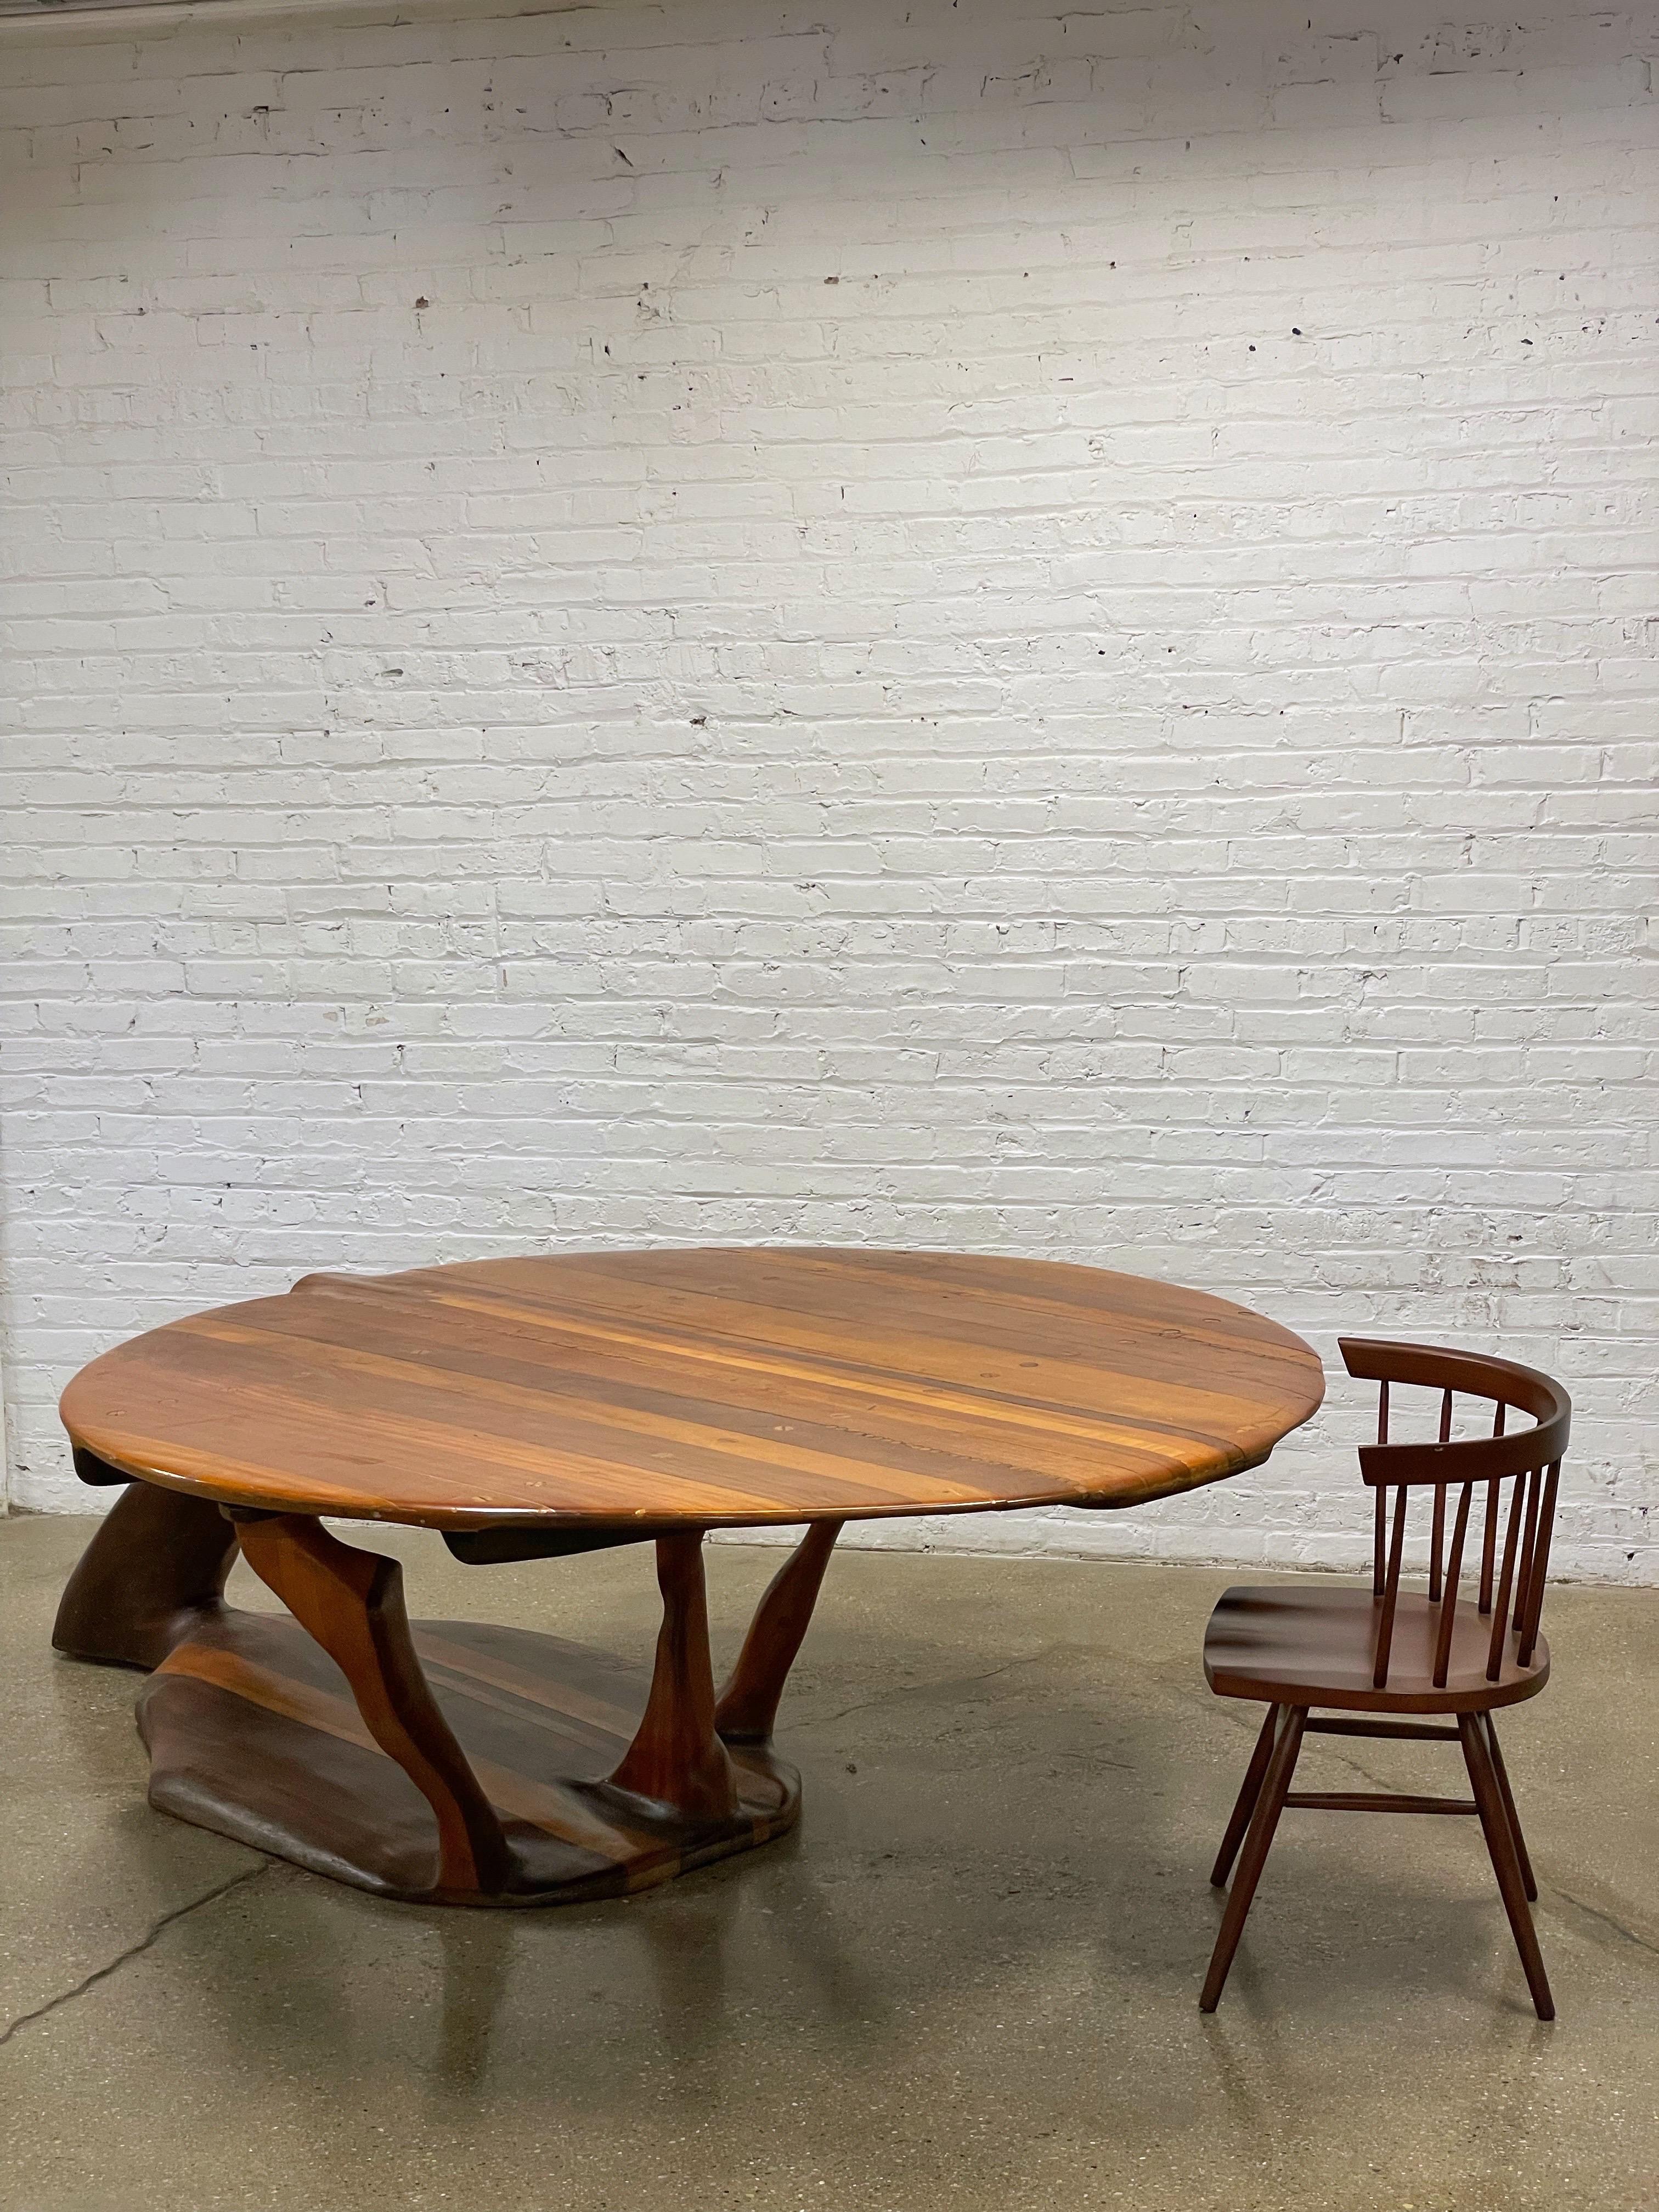 20th Century One Of A Kind Sculptural Studio Craft Dining Table For Sale